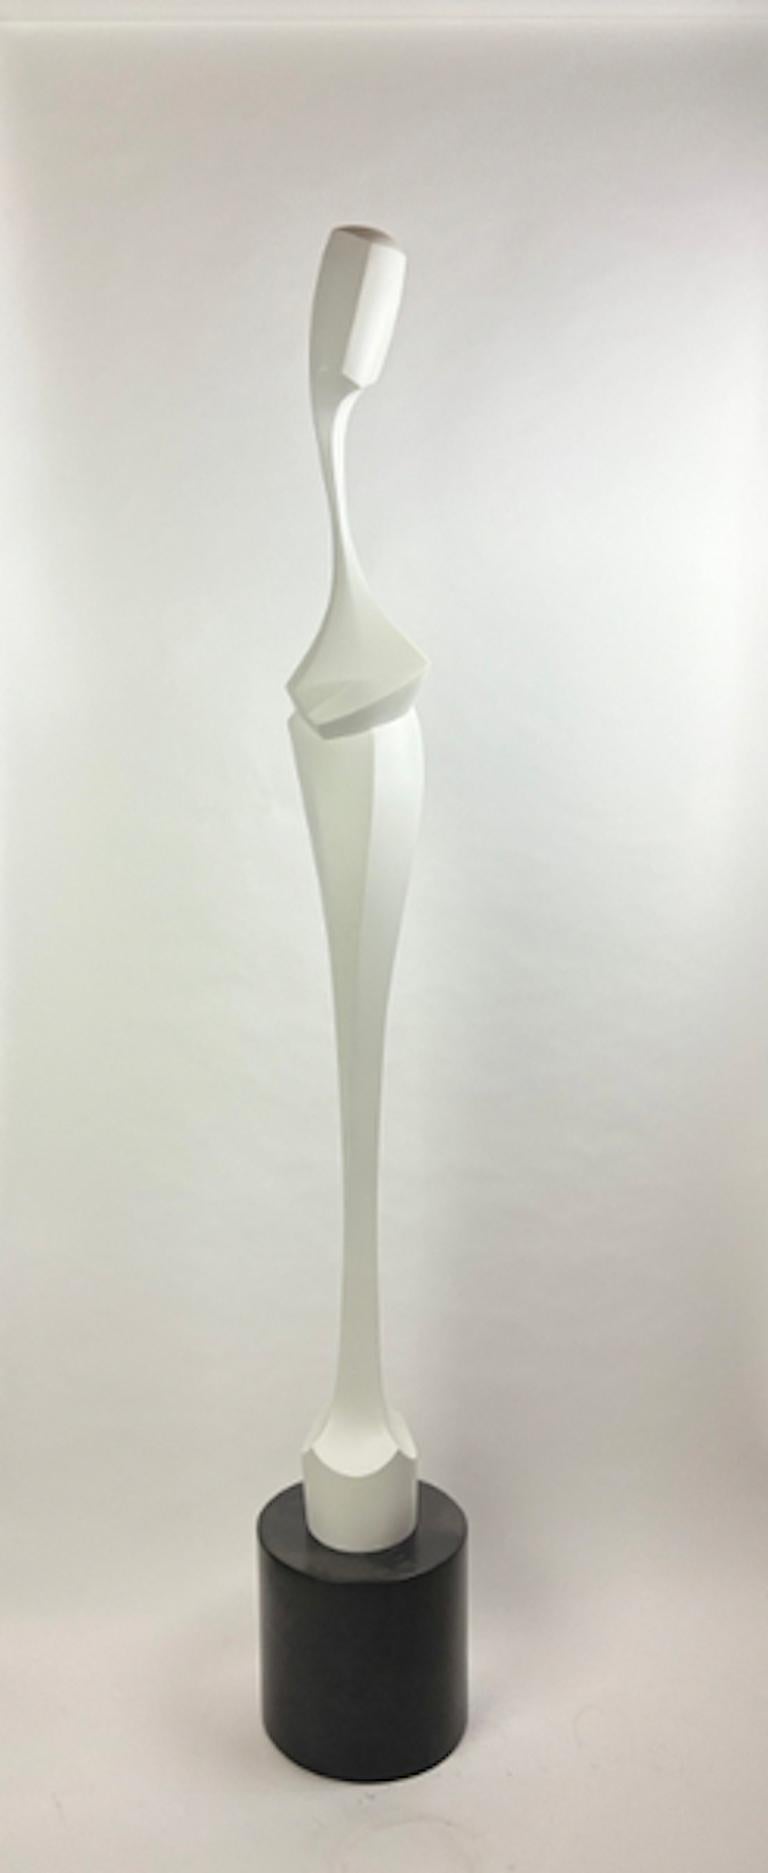 Medium: Carved wood figure with white lacquer finish, concrete

As an artist I strive to create elegant sculptures that capture the true essence of the subject matter. Form, line and surface are used as the visual language. The figure is abstracted